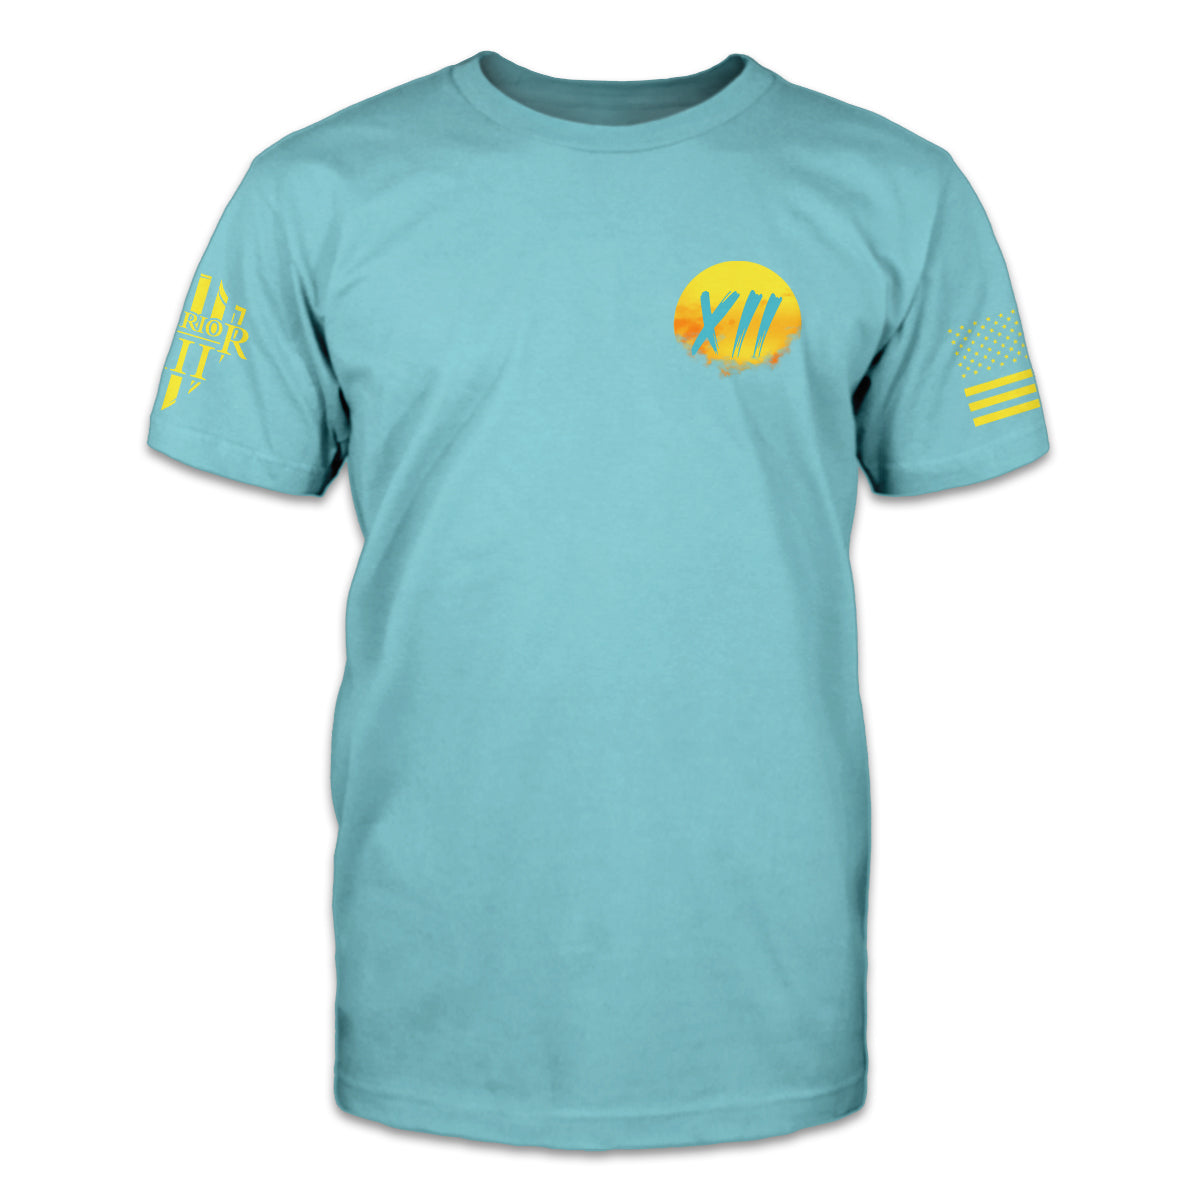 The front of a Tahiti Blue shirt with a small pocket image of an "X I I" on a setting sun.